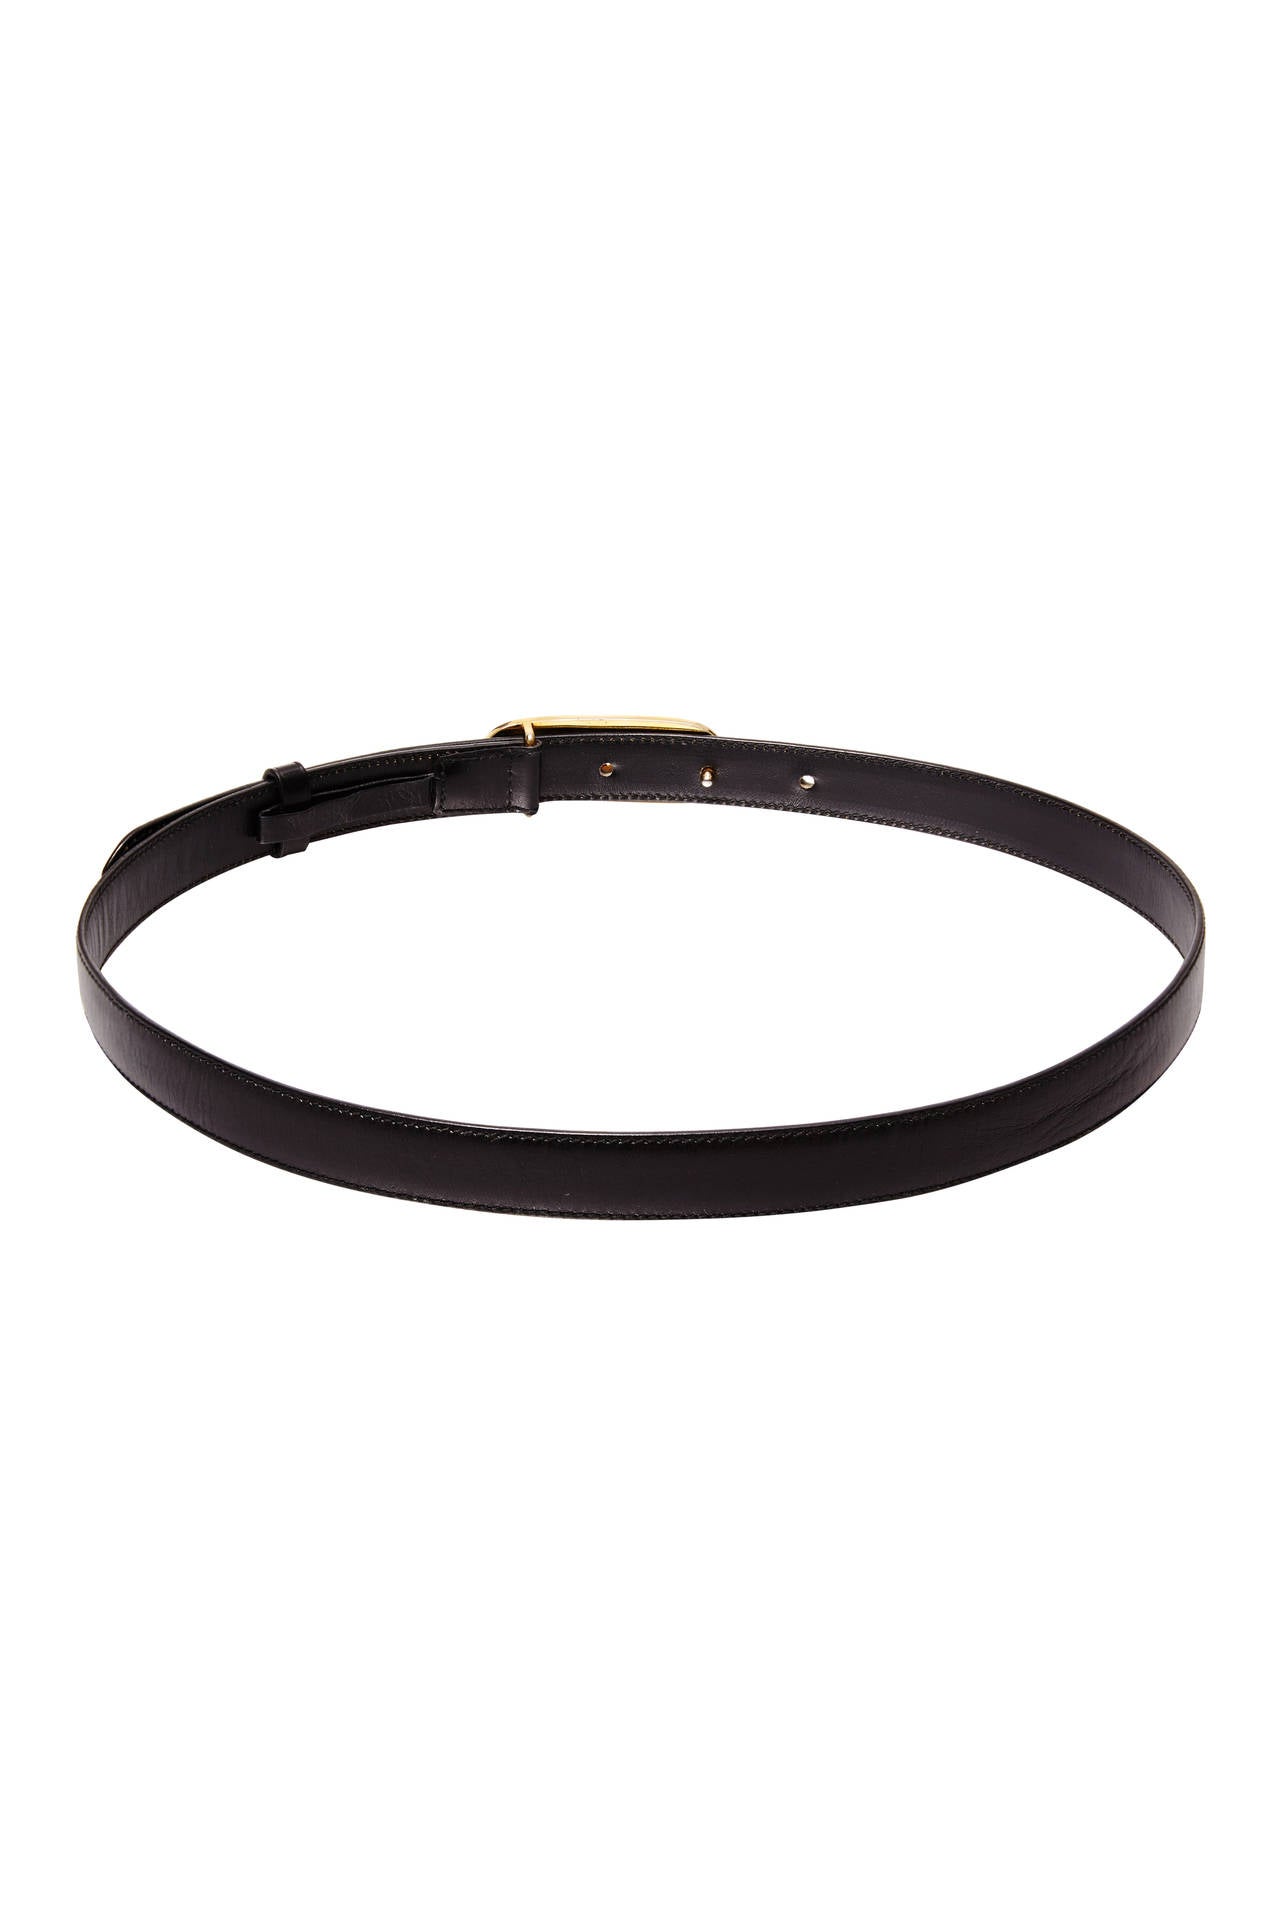 Beautiful black leather belt by Celine with gold tone metal and black leather buckle to fasten featuring the Celine logo.  It has five holes to fasten making the belt between 75cm/29.5 and 86cm/34” when fastened so could be worn at the waist or hips